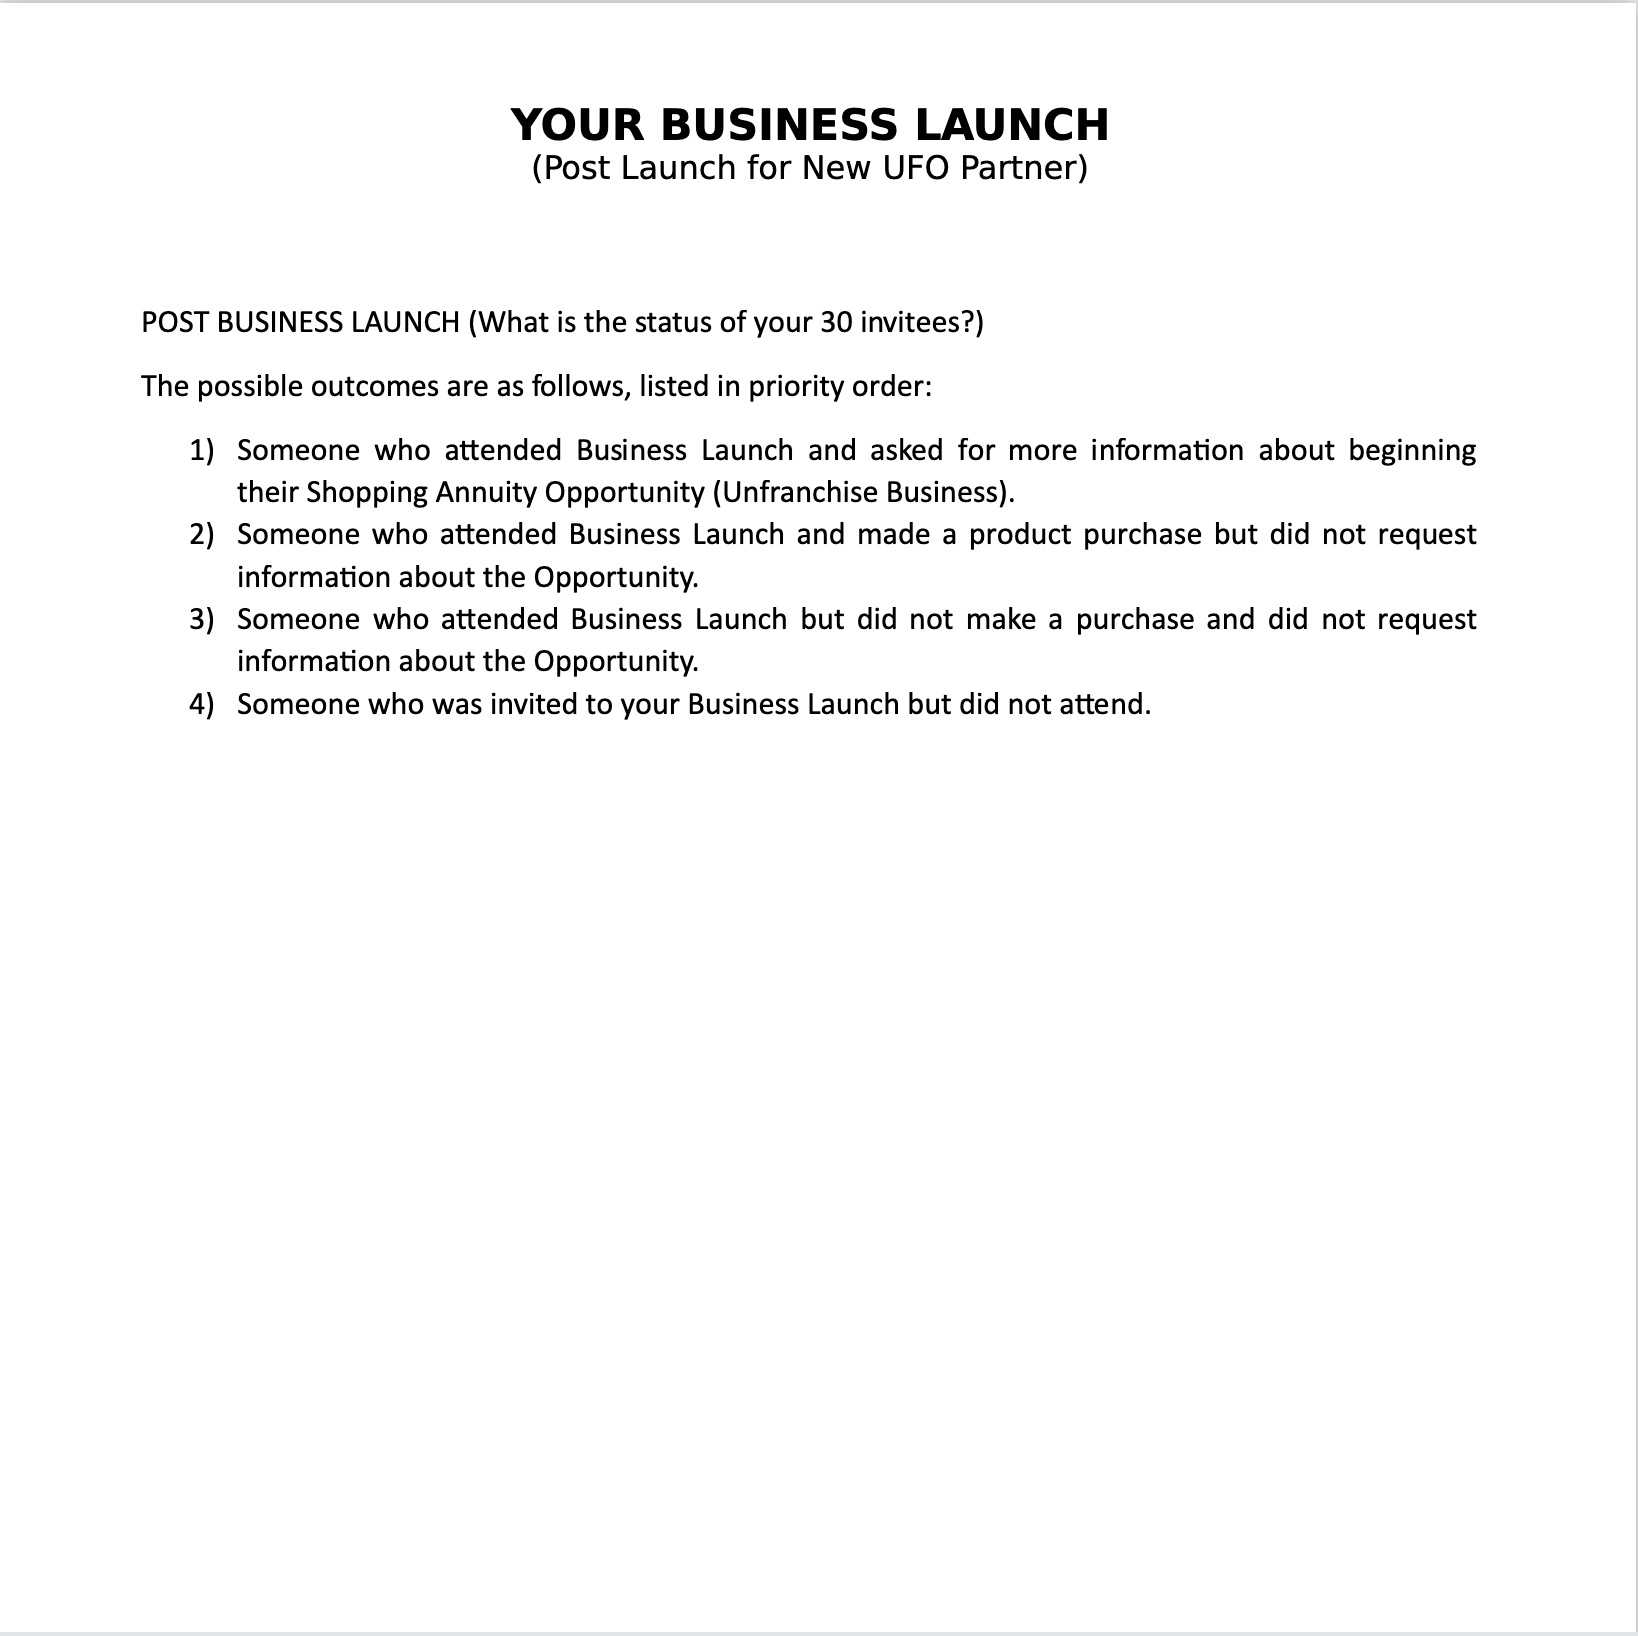 Post Business Launch Guide